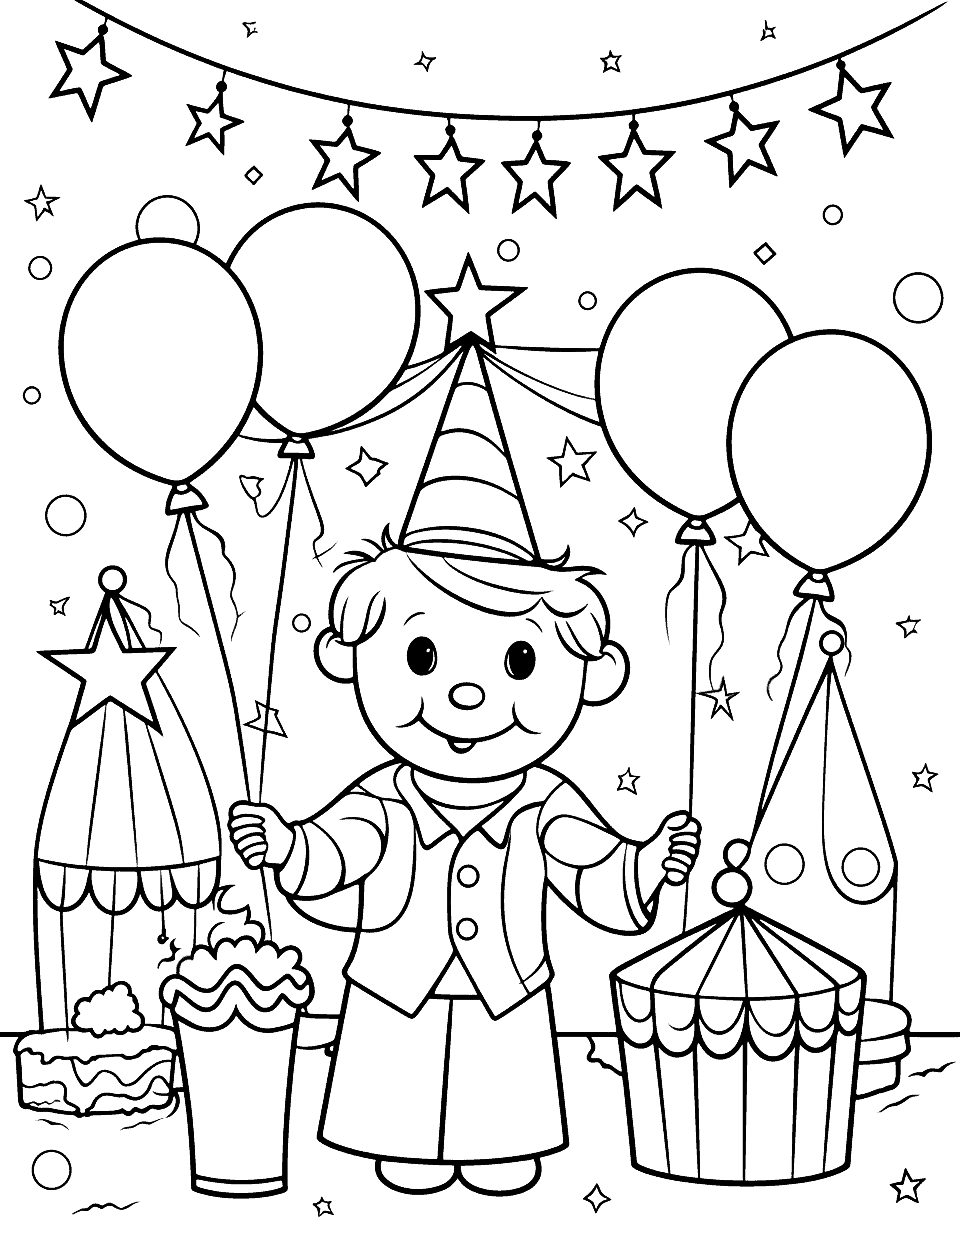 Circus Themed Birthday Happy Coloring Page - A happy clown juggling birthday balloons next to a big top tent.